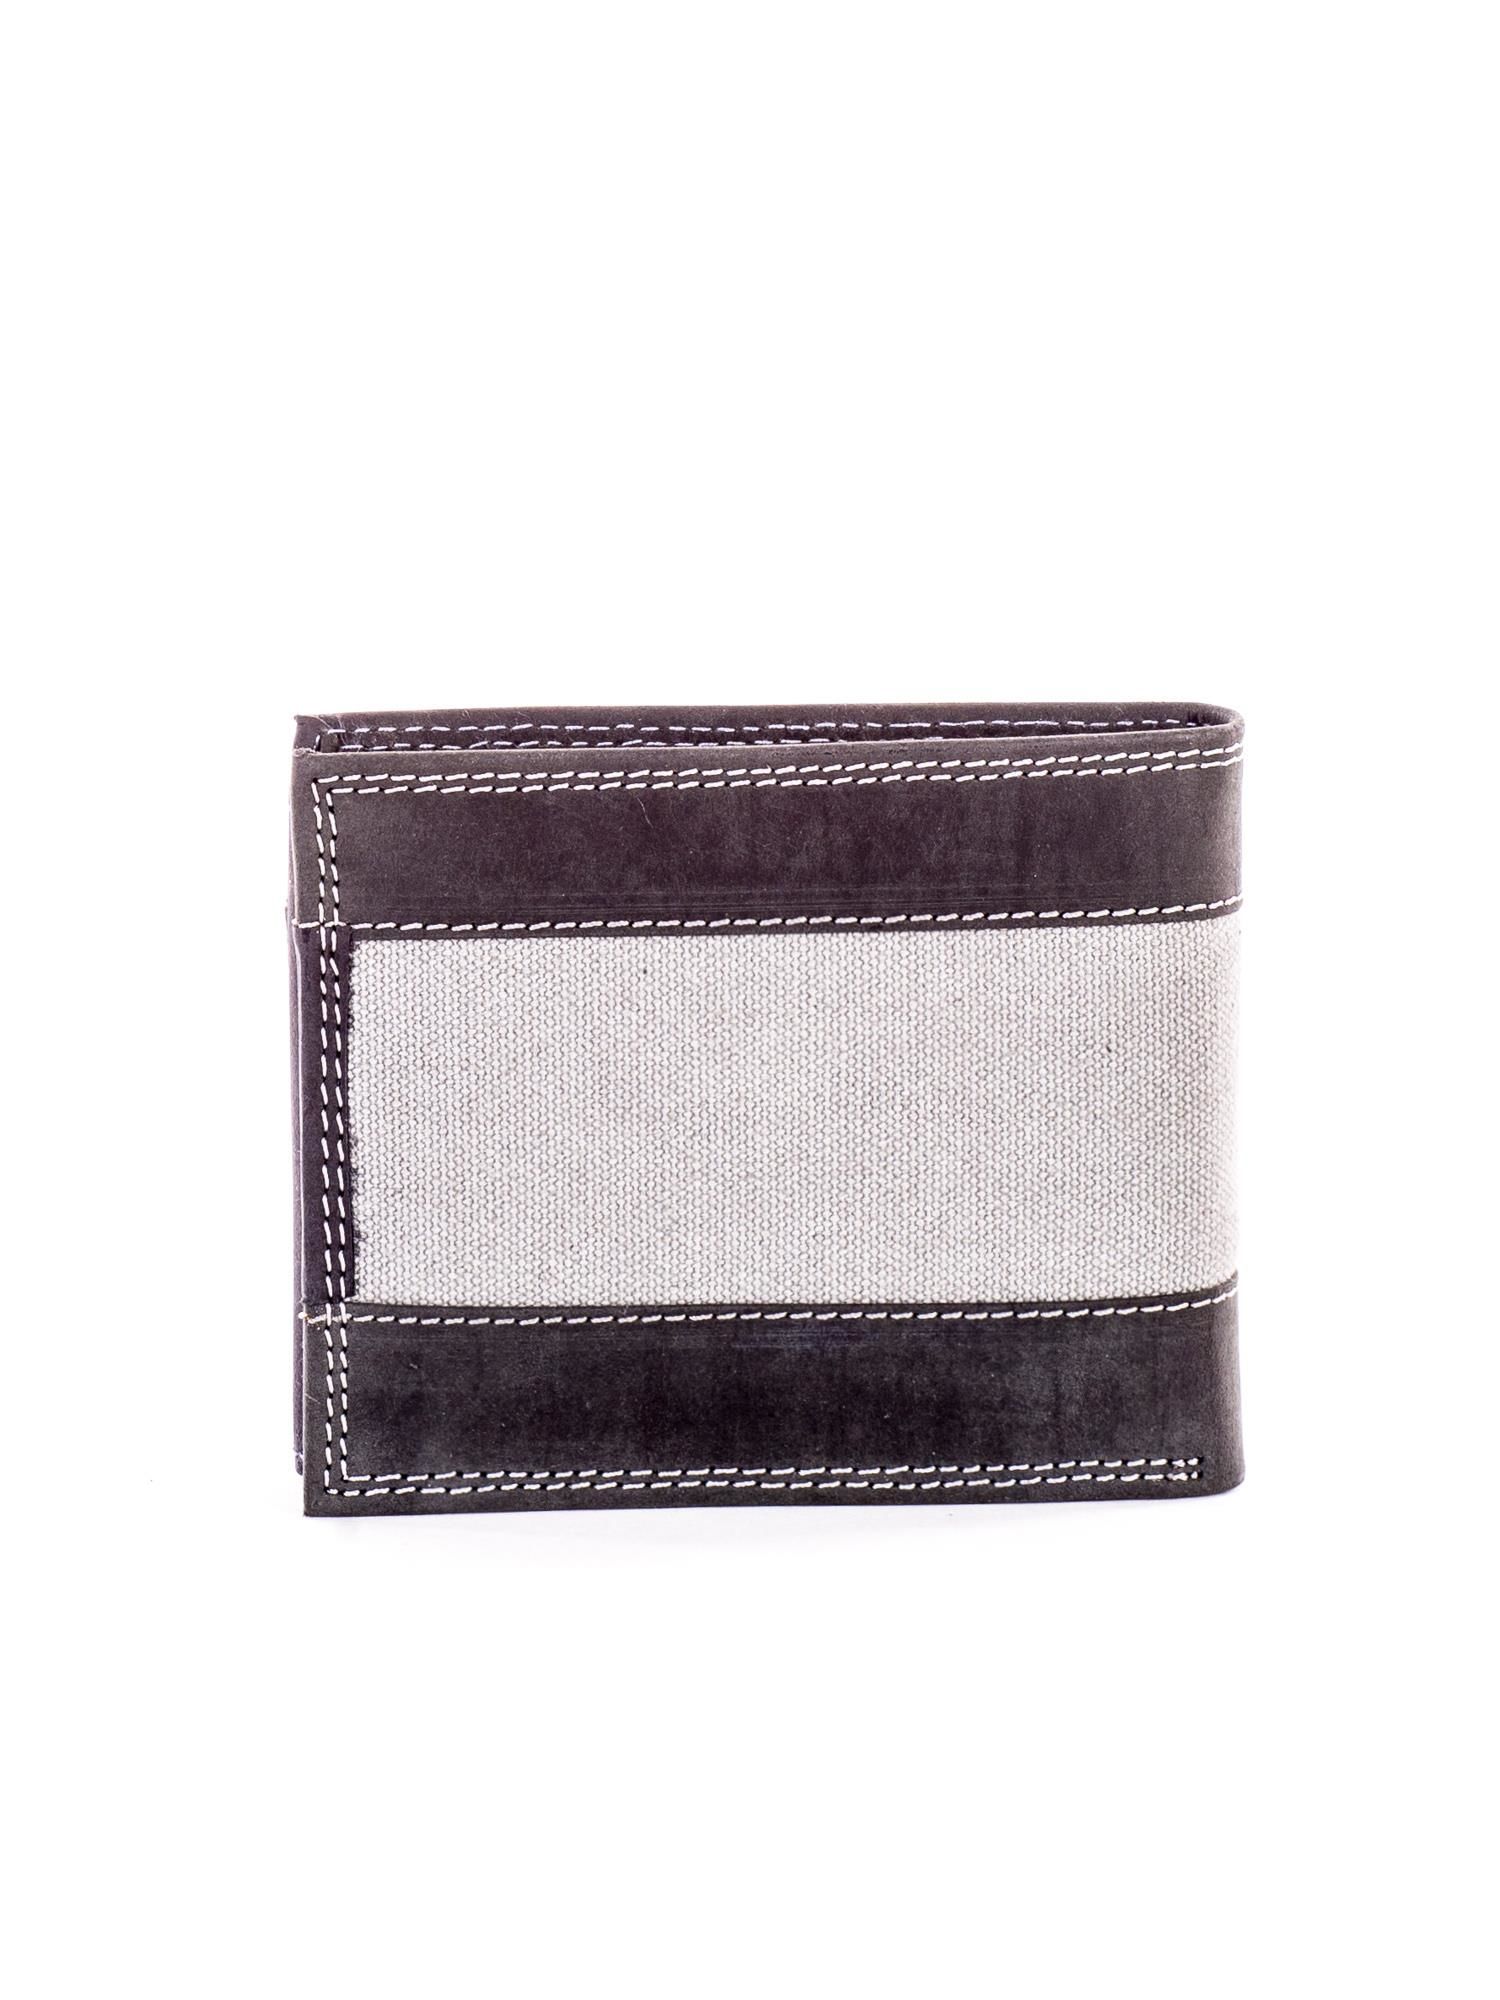 Black leather wallet for men with fabric module